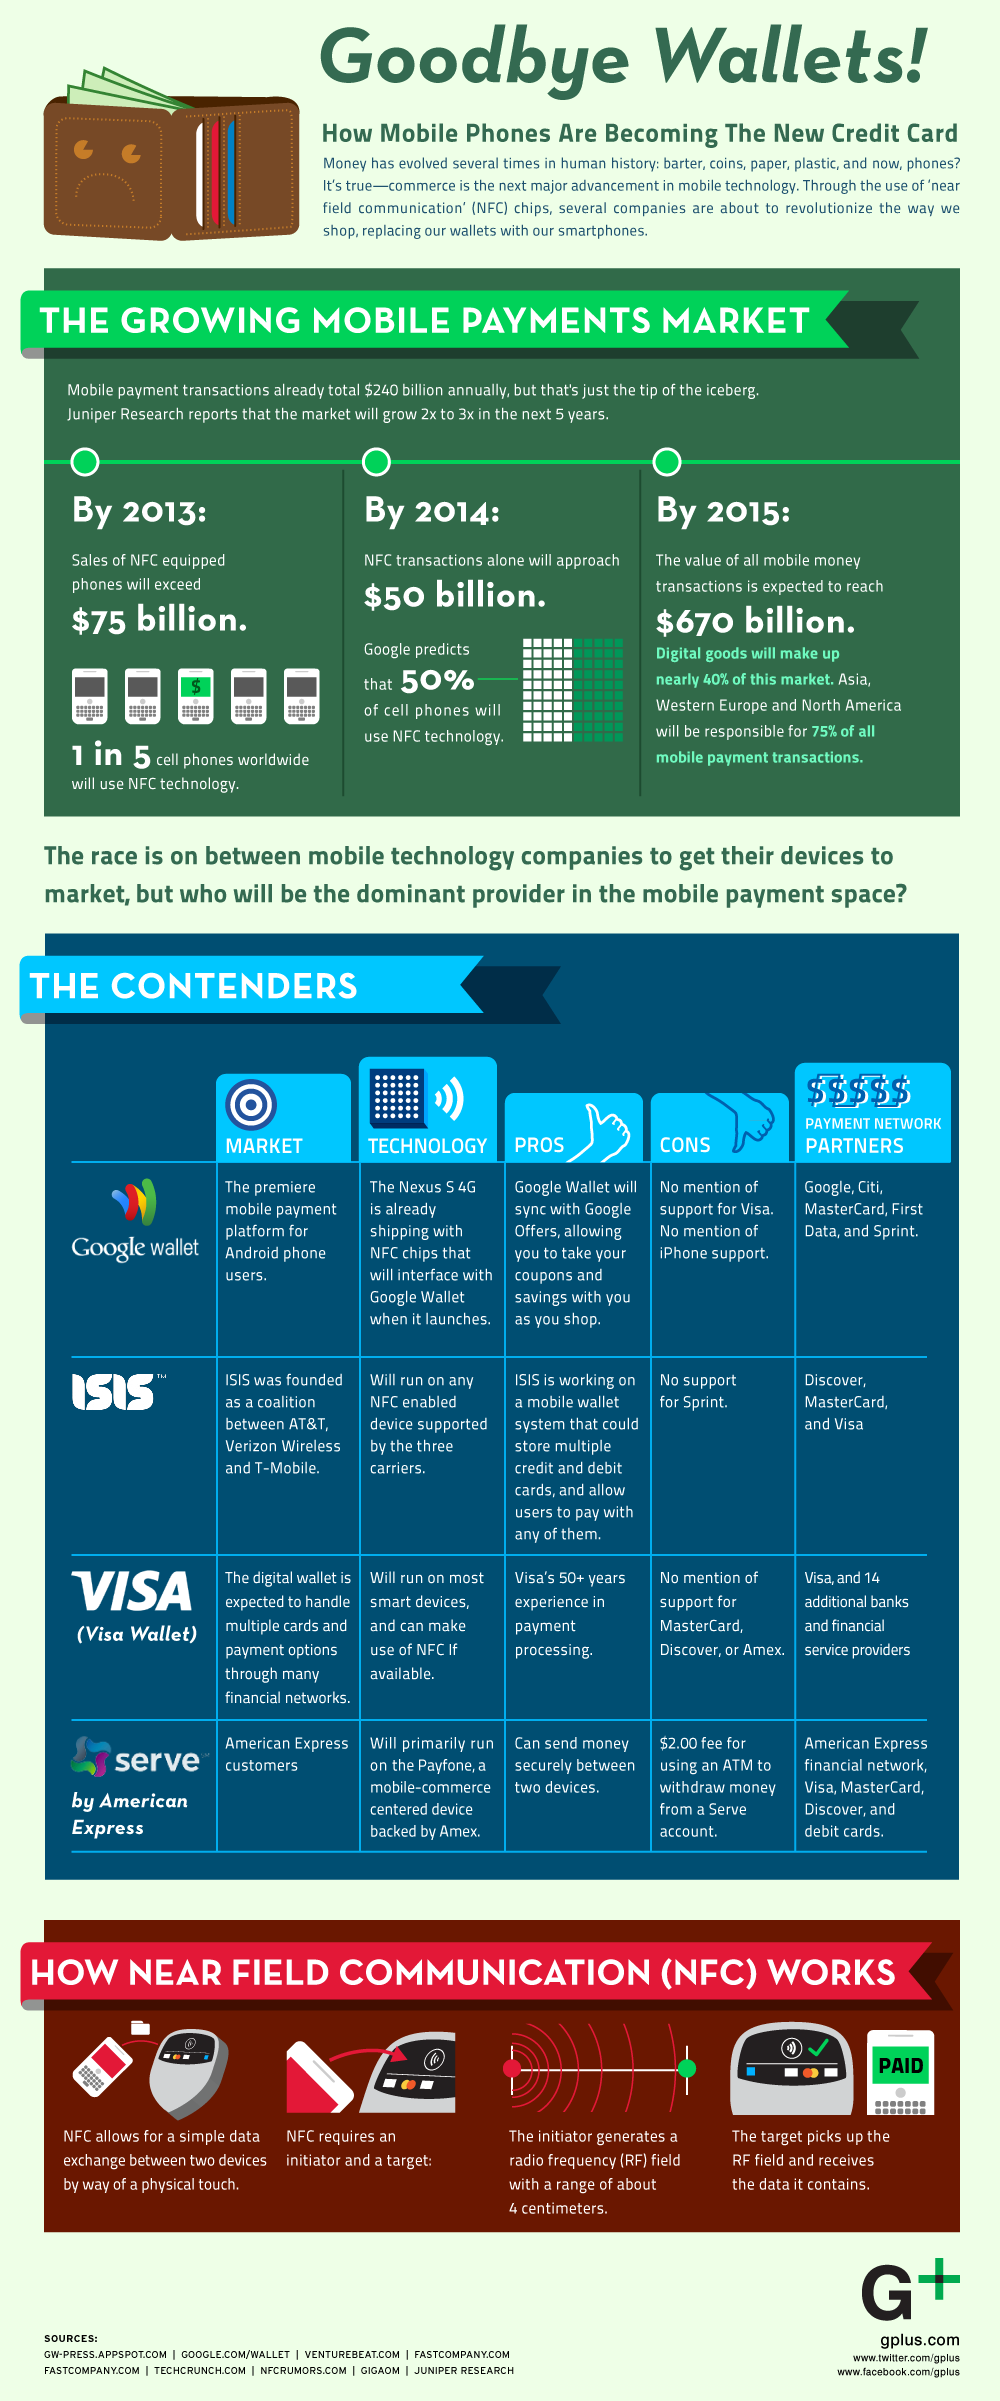 goodbye-wallets-how-mobile-phones-are-becoming-the-new-credit-card_50290b77a713d